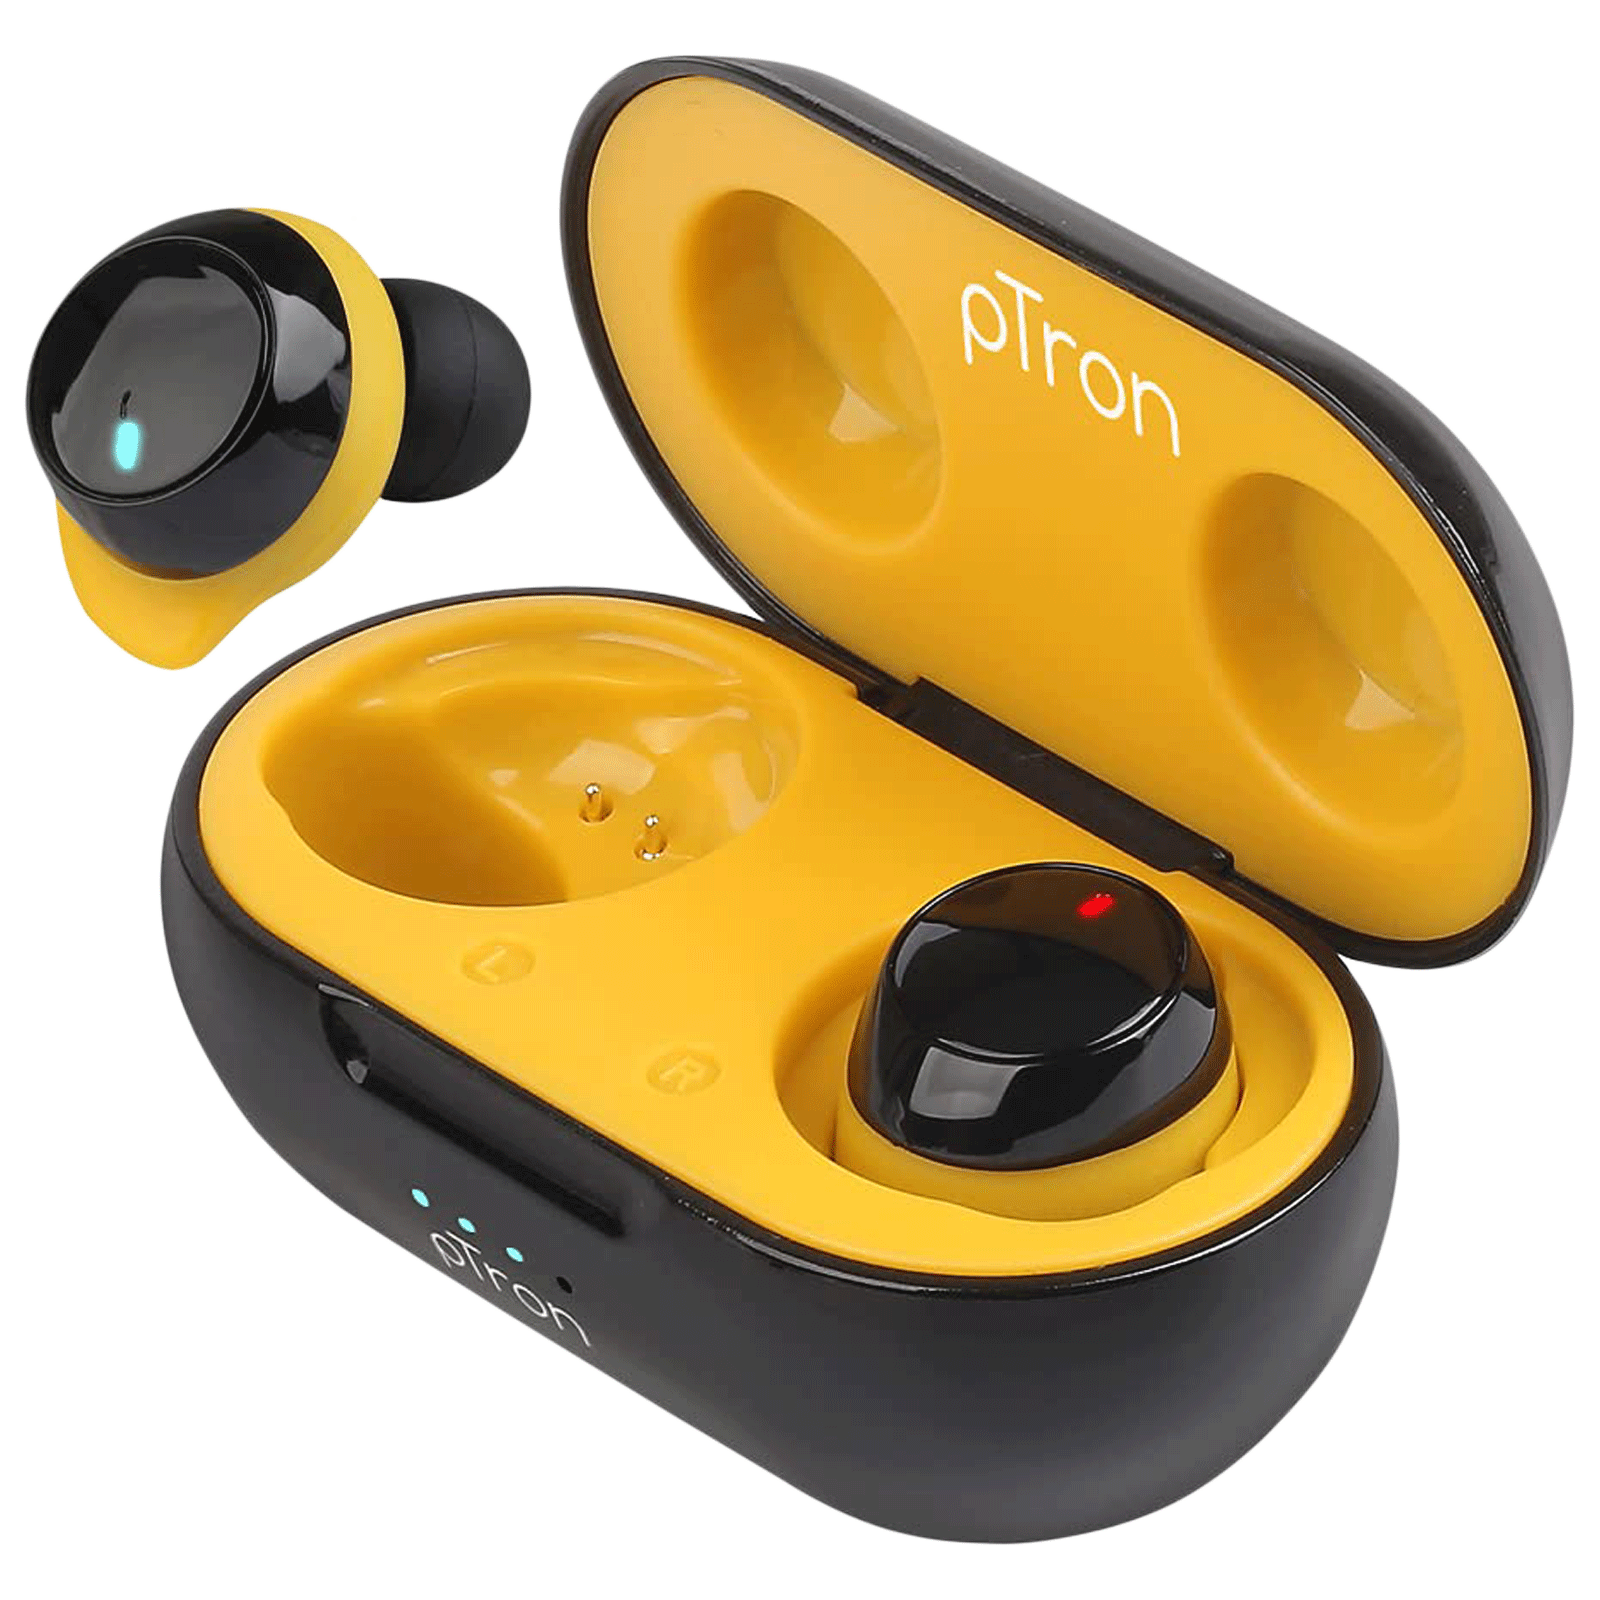 PTron - pTron Bassbuds Evo In-Ear Passive noise Cancellation Truly Wireless Earbuds with Mic ( Bluetooth 5.0, Stereo Sound, 140317861, Black/Yellow)